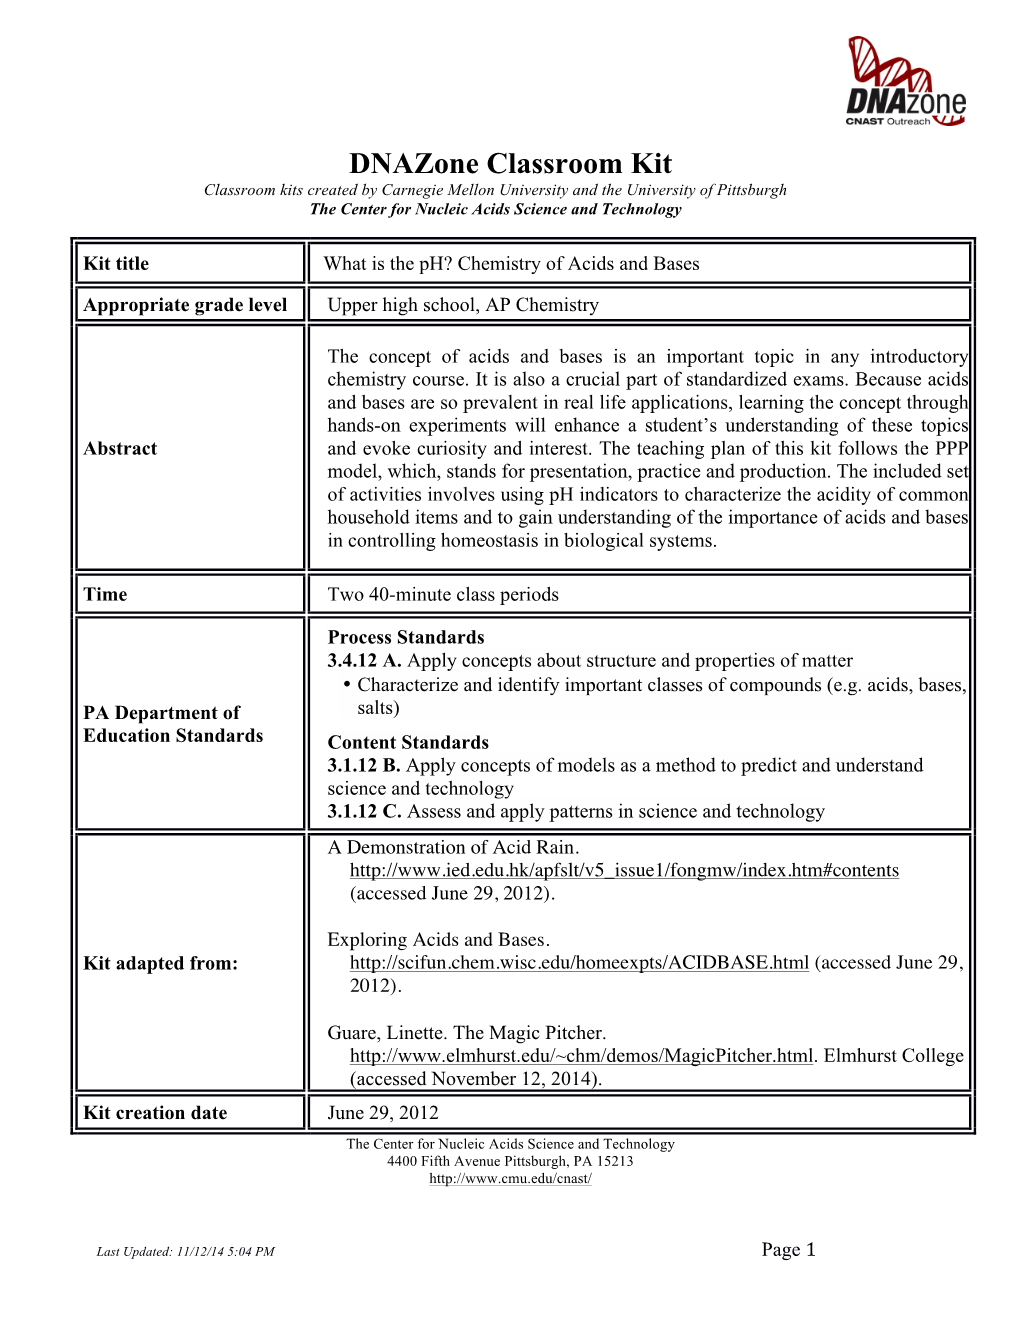 Dnazone Classroom Kit Classroom Kits Created by Carnegie Mellon University and the University of Pittsburgh the Center for Nucleic Acids Science and Technology